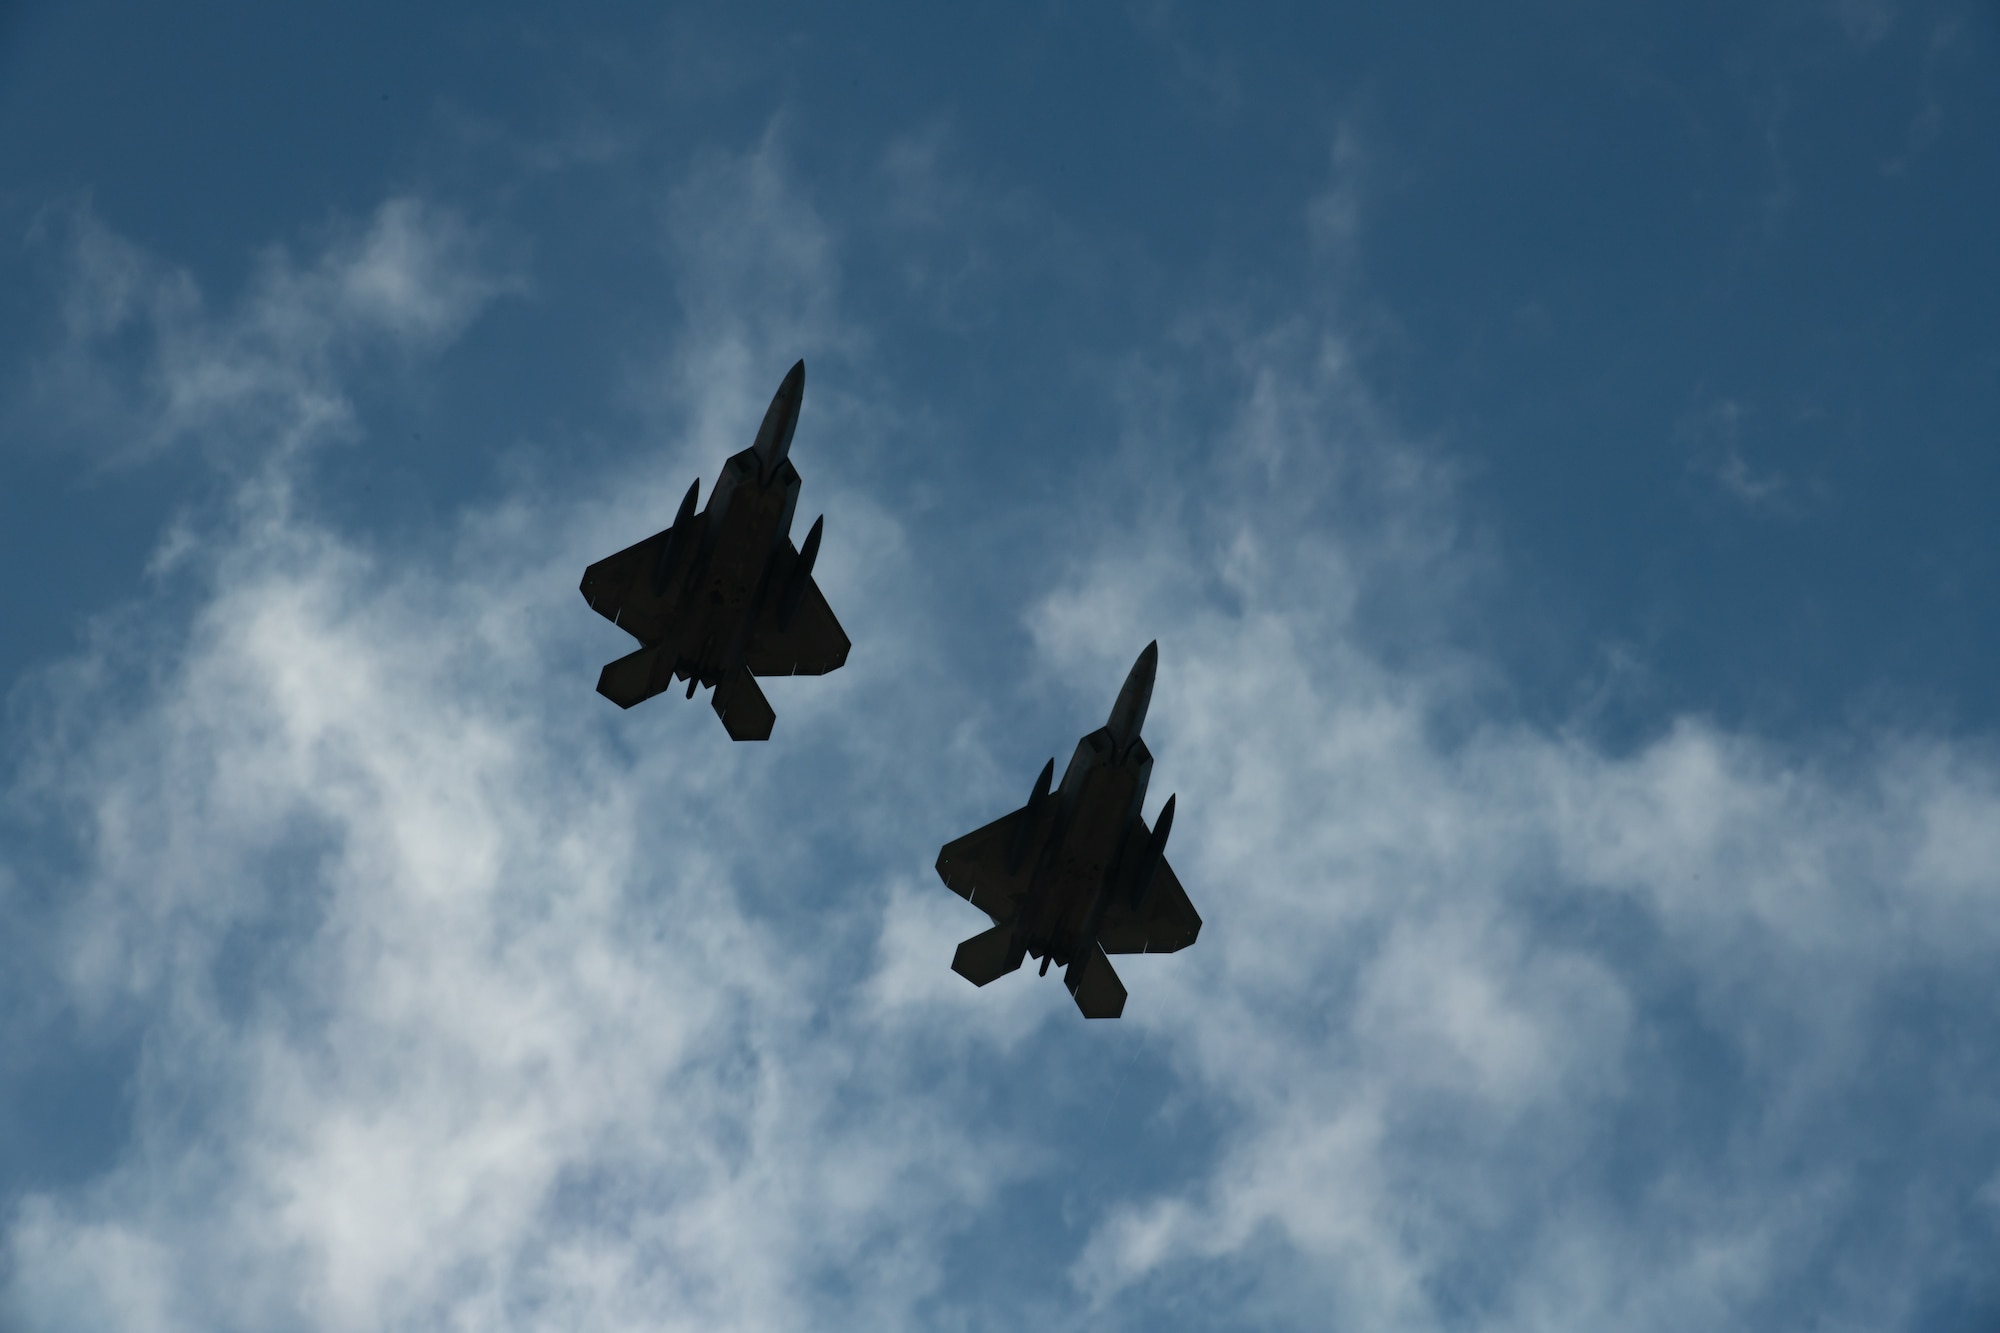 Two F-22 Raptors fly overhead. Only their silhouettes can be seen.